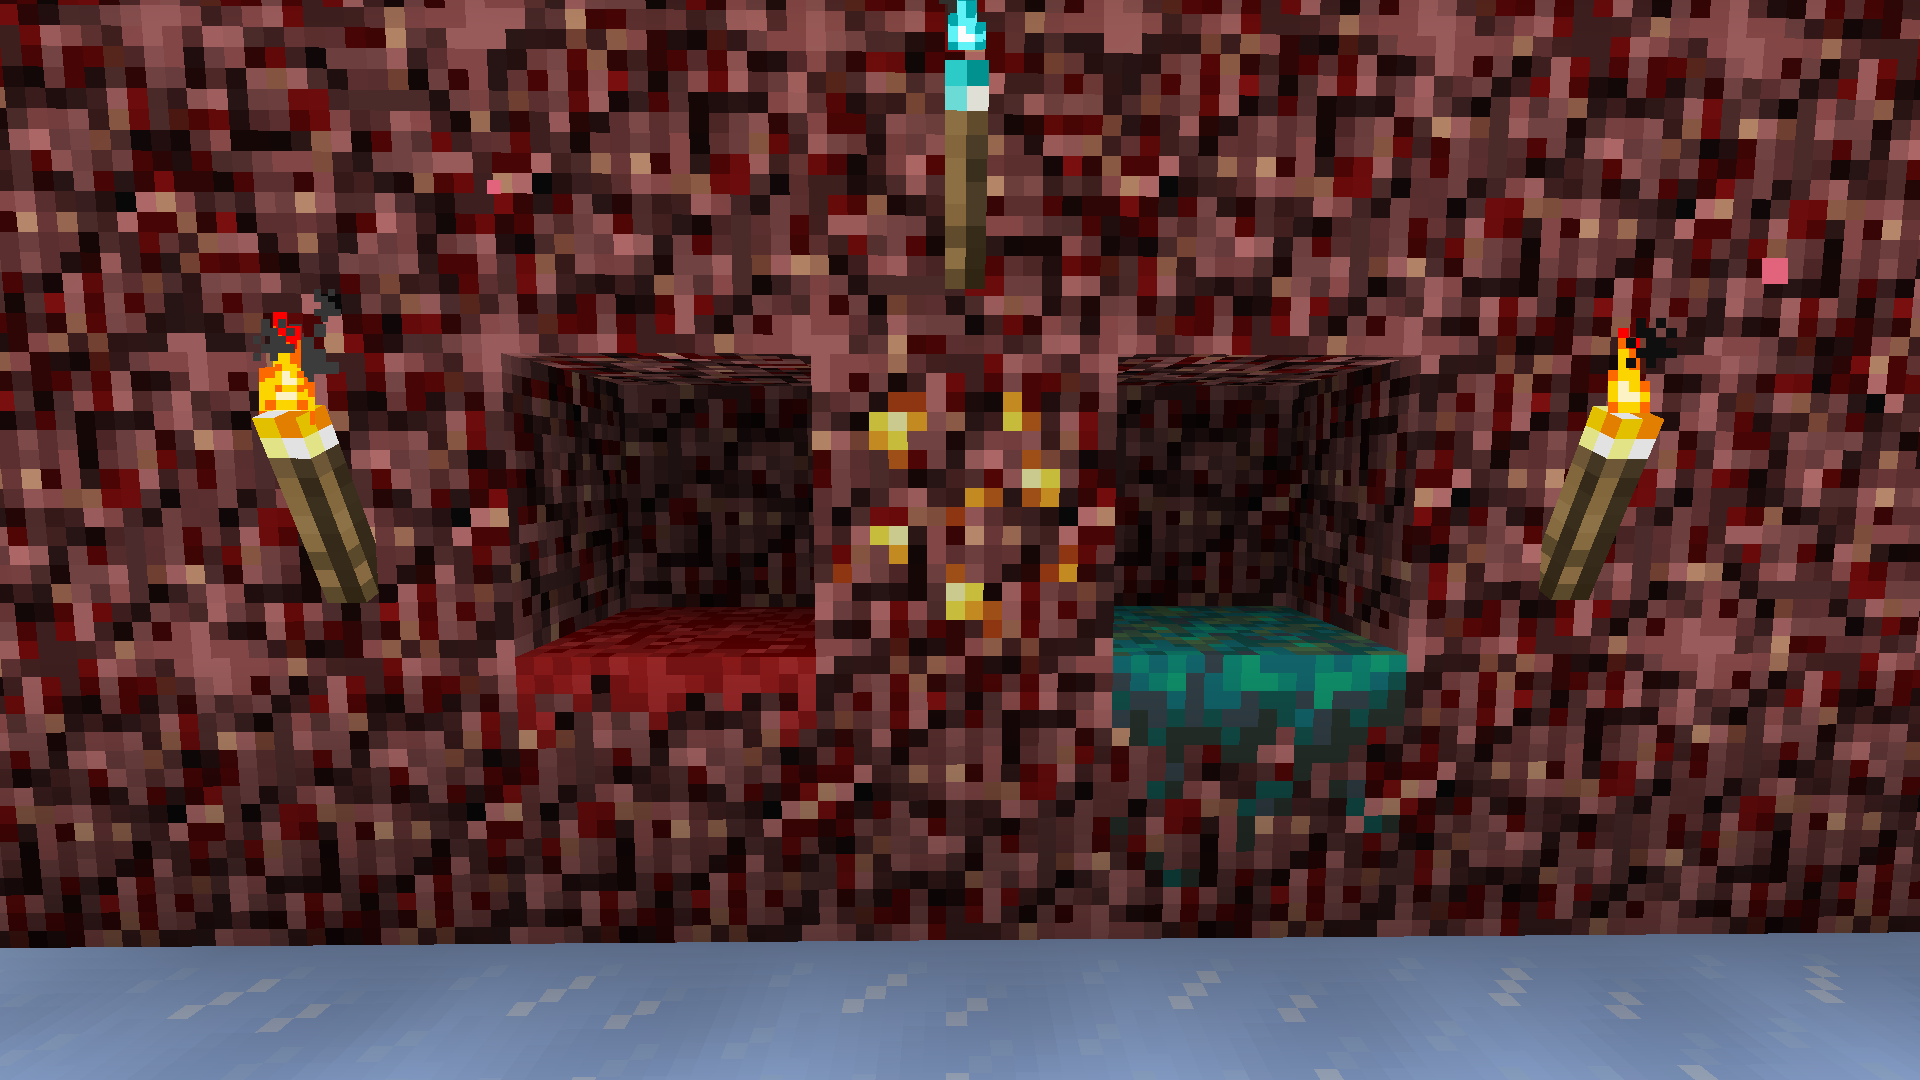 This changes "the nether gold ore" and makes it blend in with the...